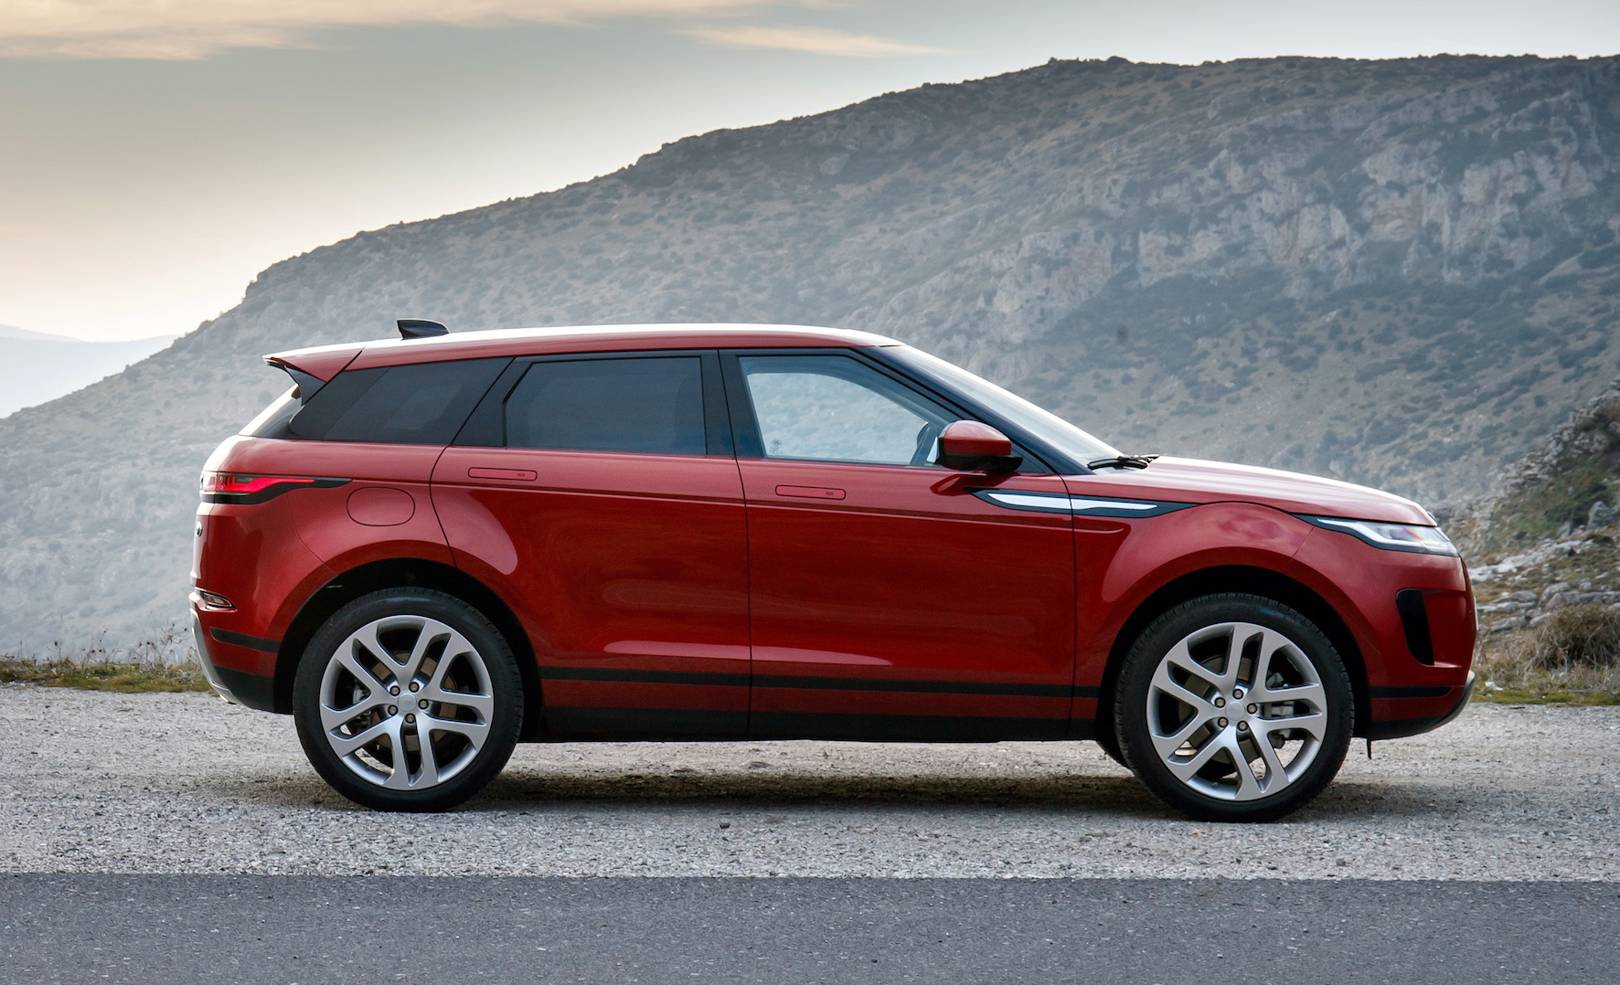 Range Rover Evoque 2019 Review Substance To Match Its Style